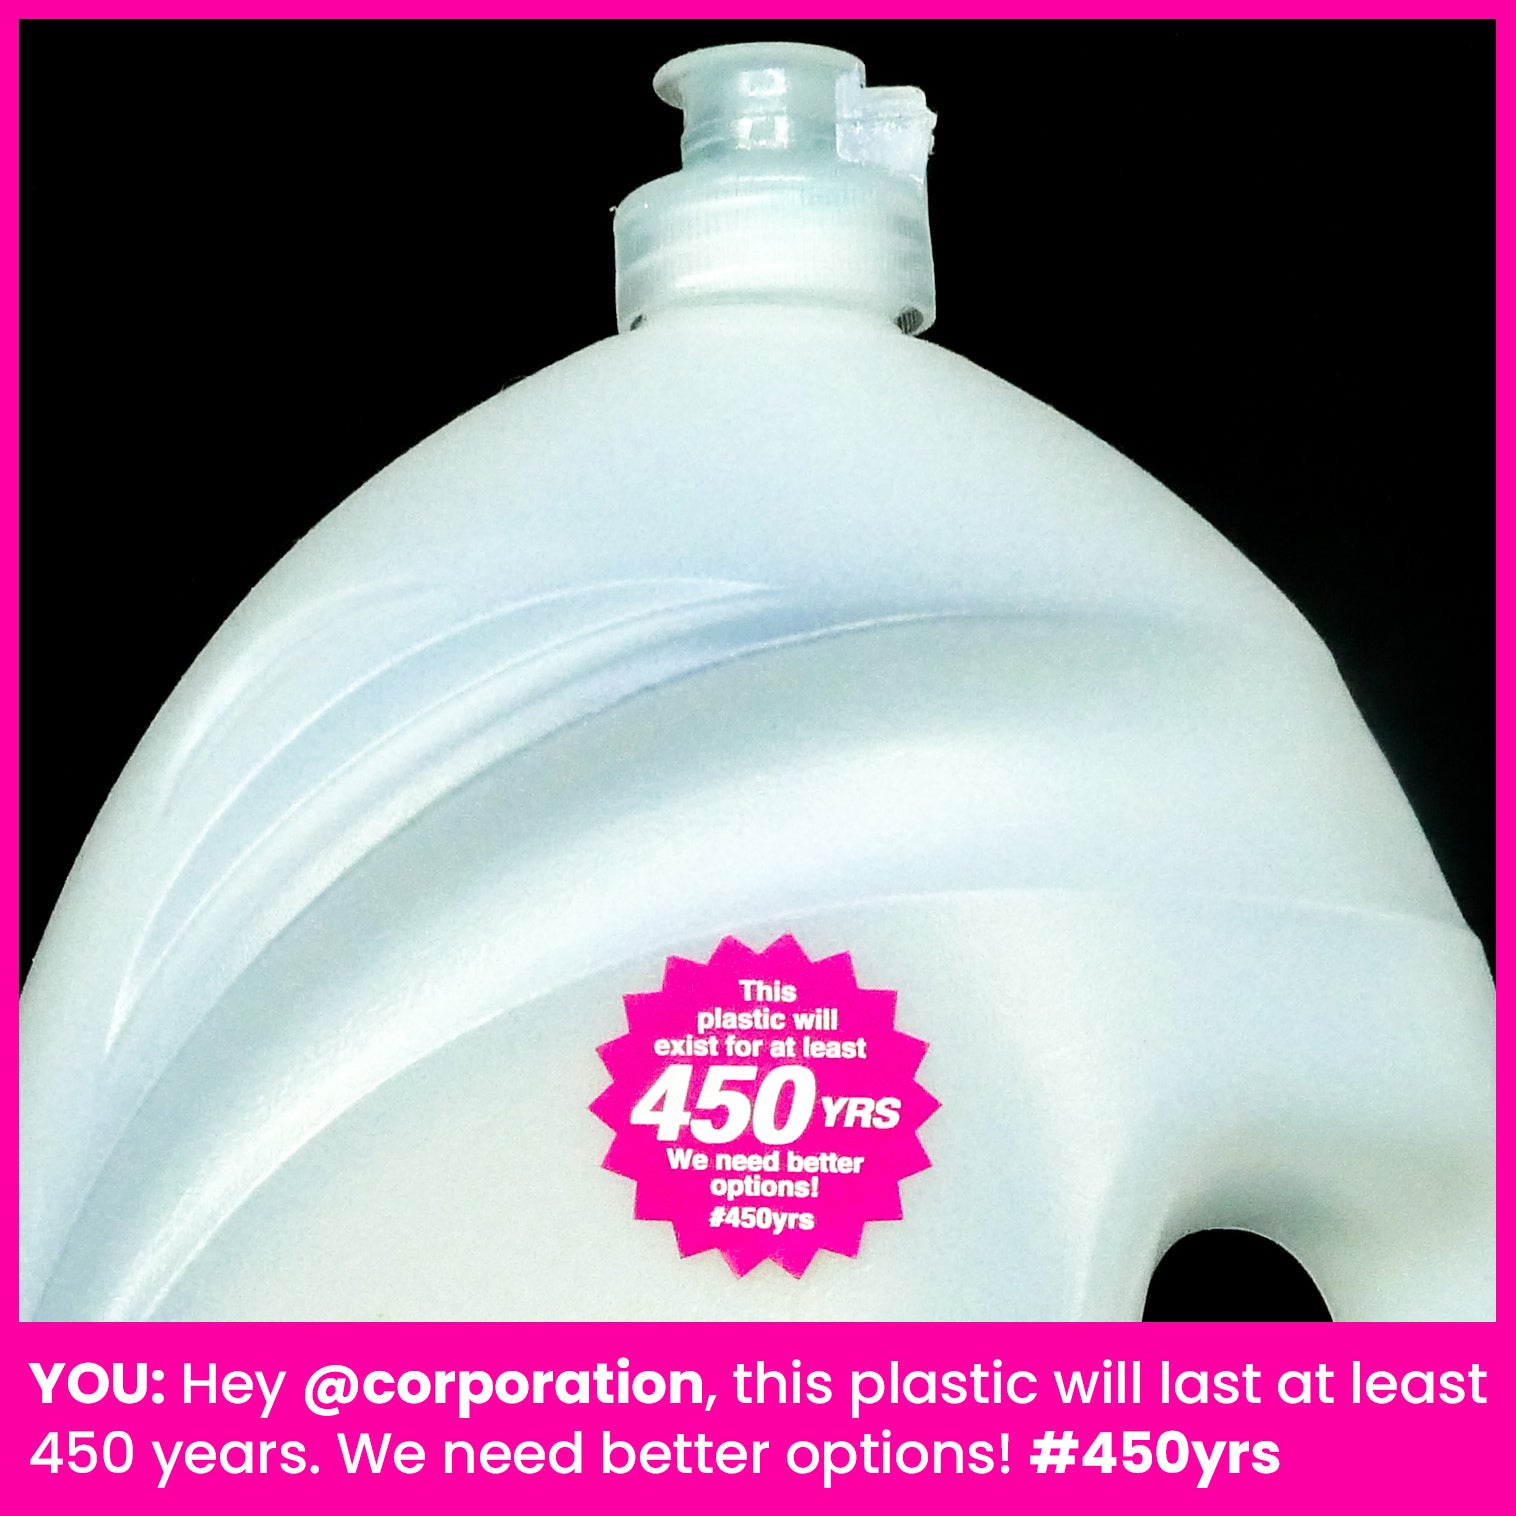 Photograph of a white, single-use plastic jug with a pink, starburst-shaped 1.25 inch sticker on it that says: 'This plastic will exist for at least 450 years. We need better options #450yrs.'